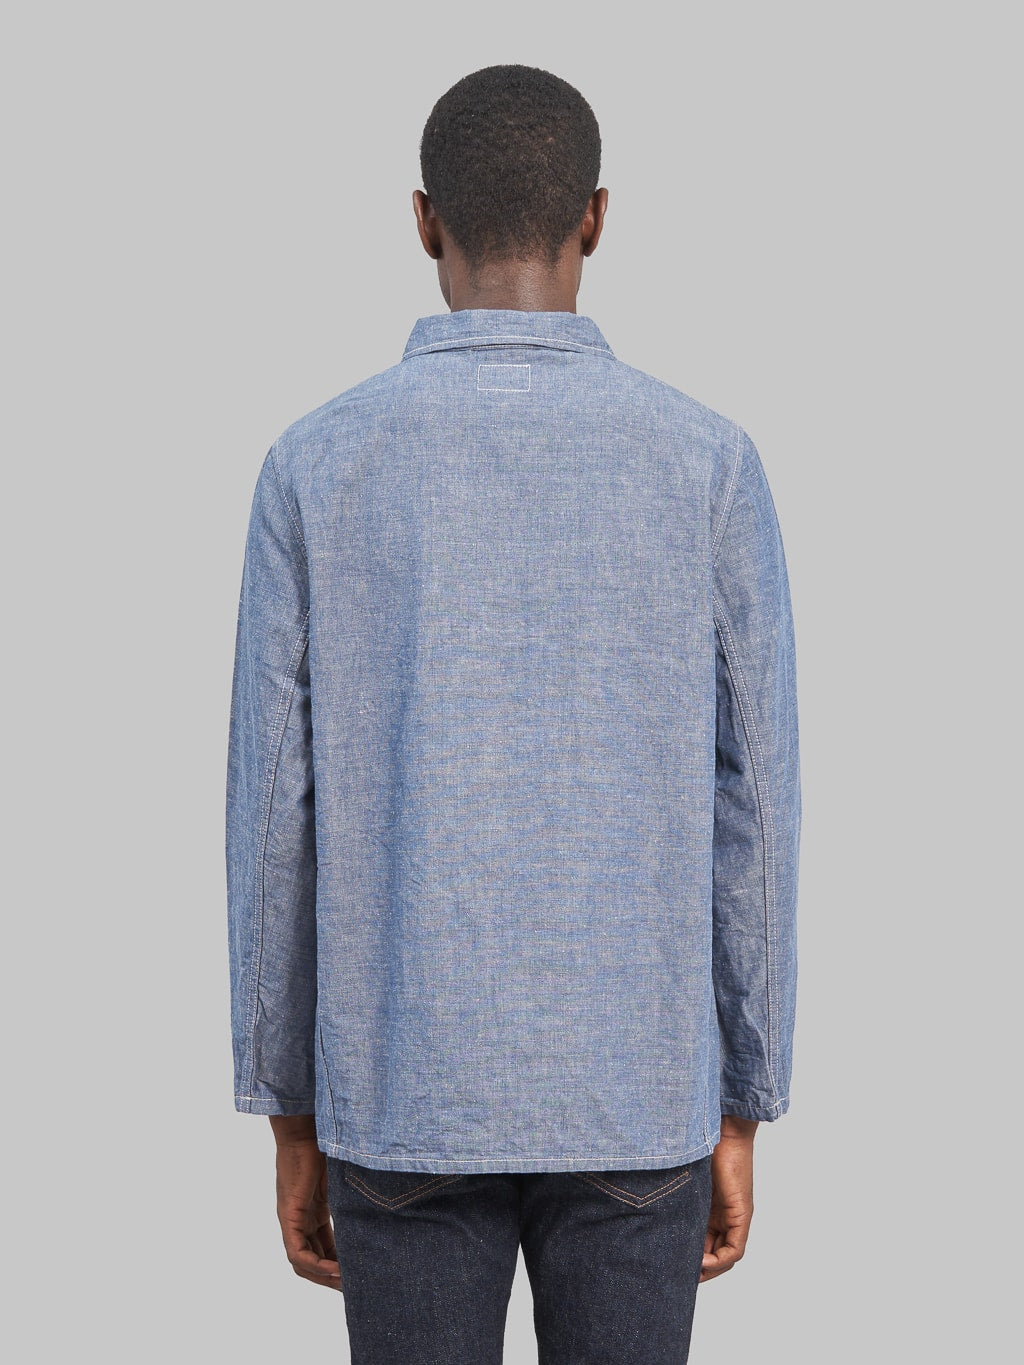 Oni denim heavy chambray blue gray coverall model back fit